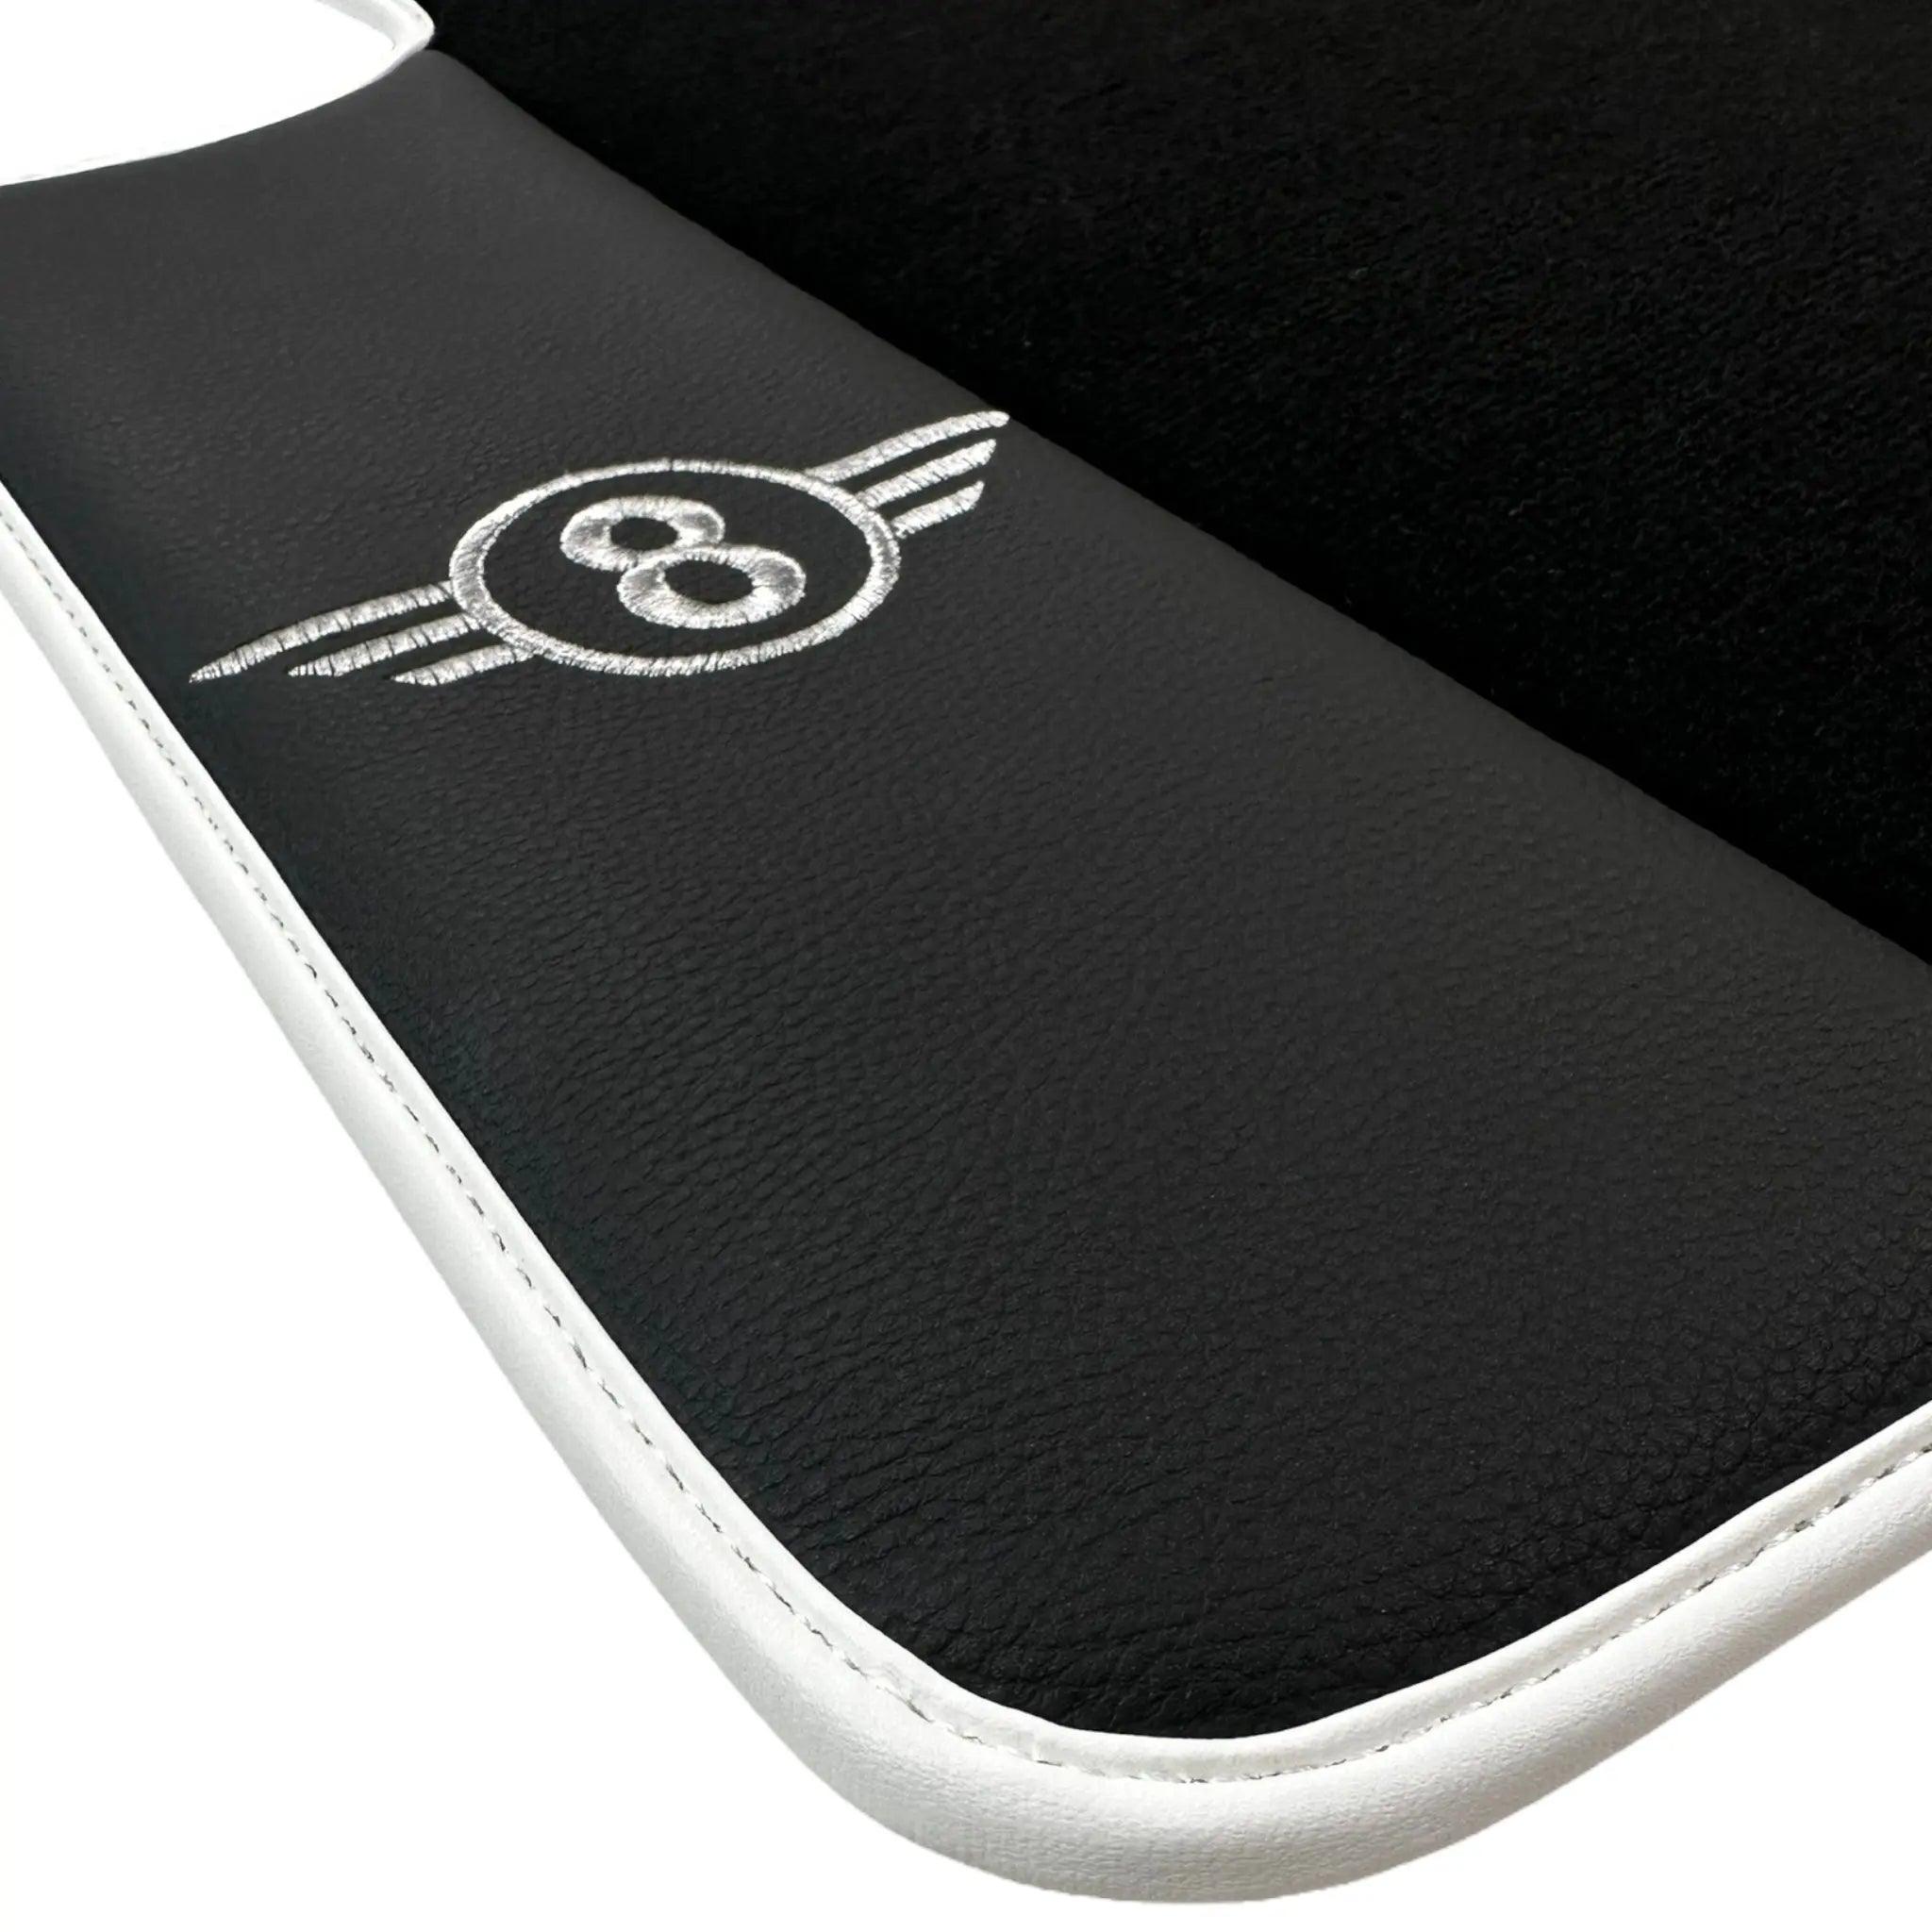 Black Floor Mats with White Trim for Mini Cooper F56 (2013-2022) with Leather